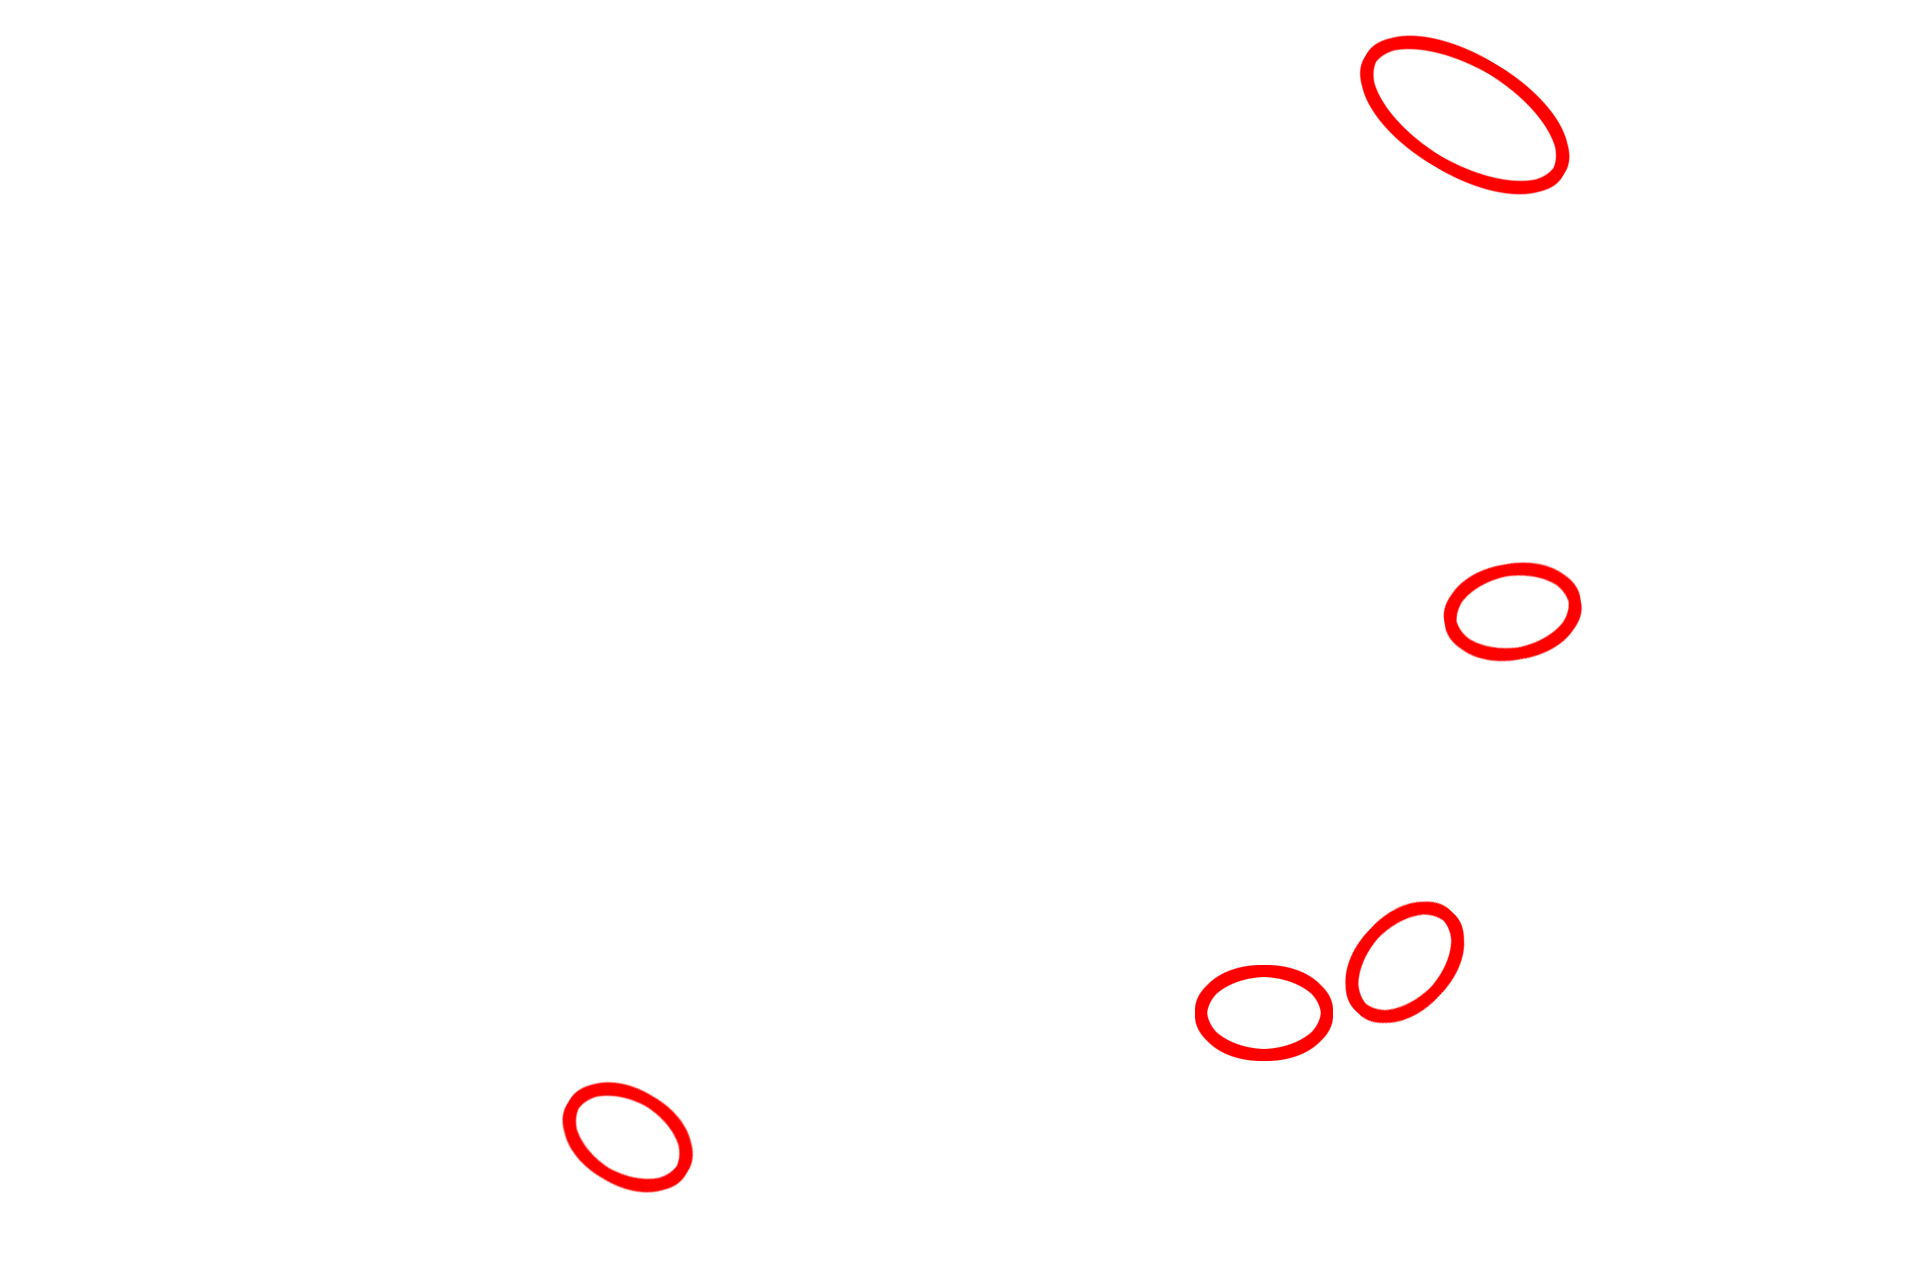 Hemidesmosomes <p>Hemidesmosomes are prominent in the basal layer of the epidermis.  Structurally, they consist of one-half of a desmosome and serve to anchor an epithelium to its underlying basal lamina.  The associated keratin intermediate filaments insert into the attachment plaques.  Transmembrane proteins extend from the plaque into the basal lamina to provide attachment.  30,000x</p>
